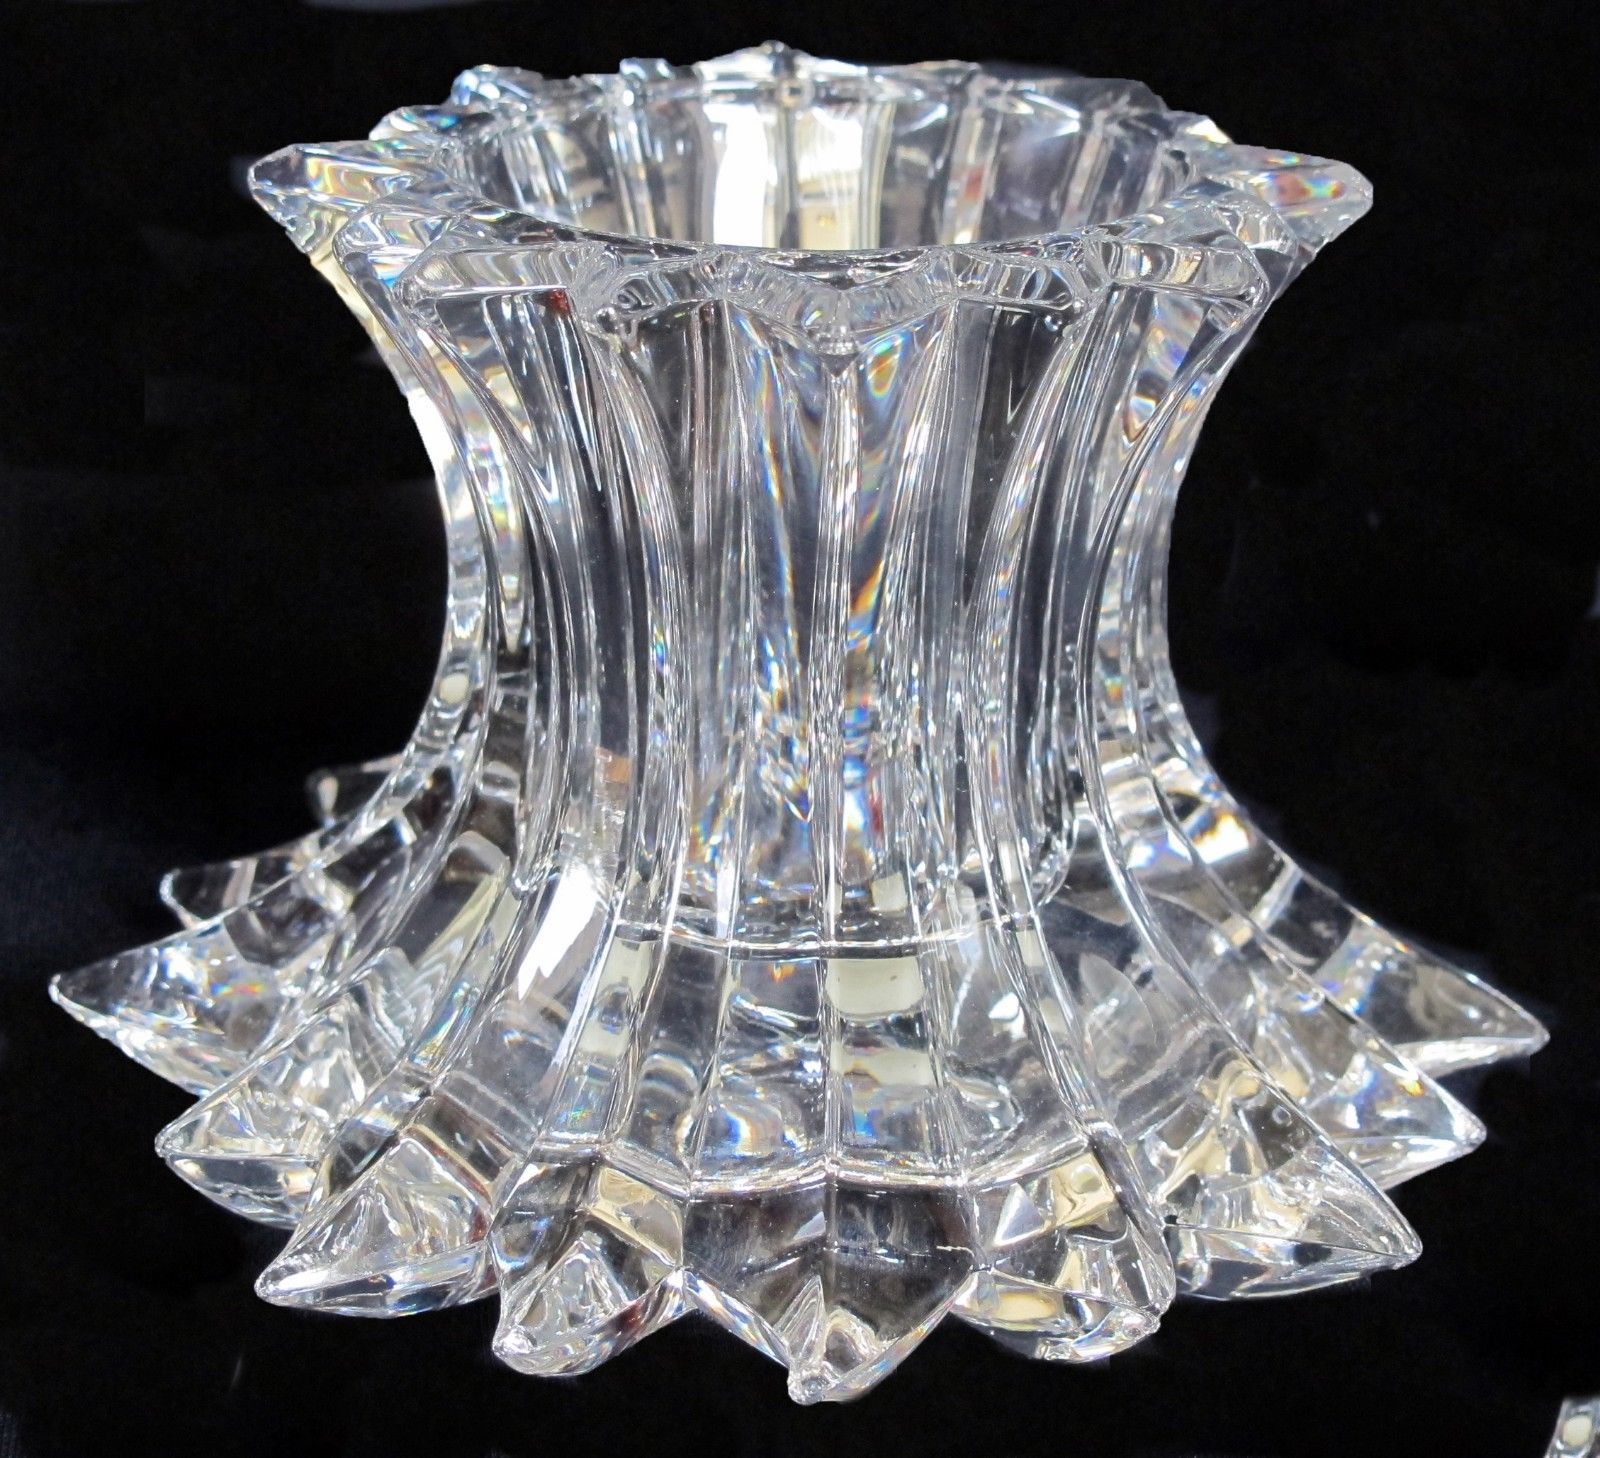 Partylite Iced Crystal Trio 7" Replacement Piece used